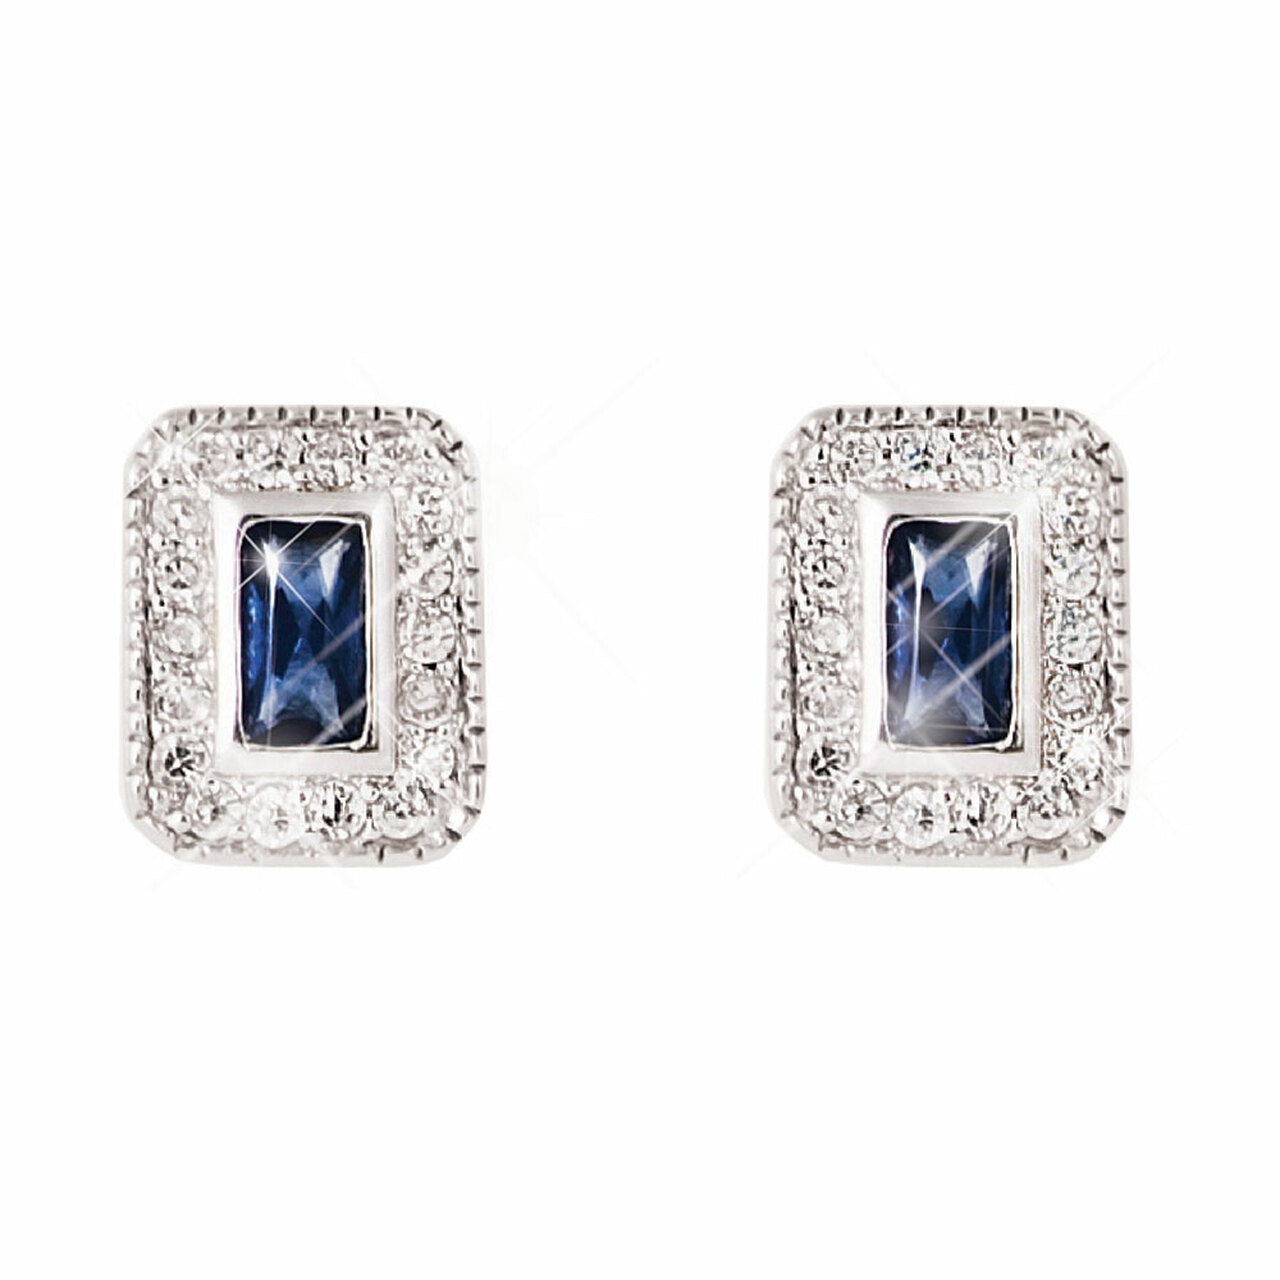 Tipperary Crystal Sapphire Earring